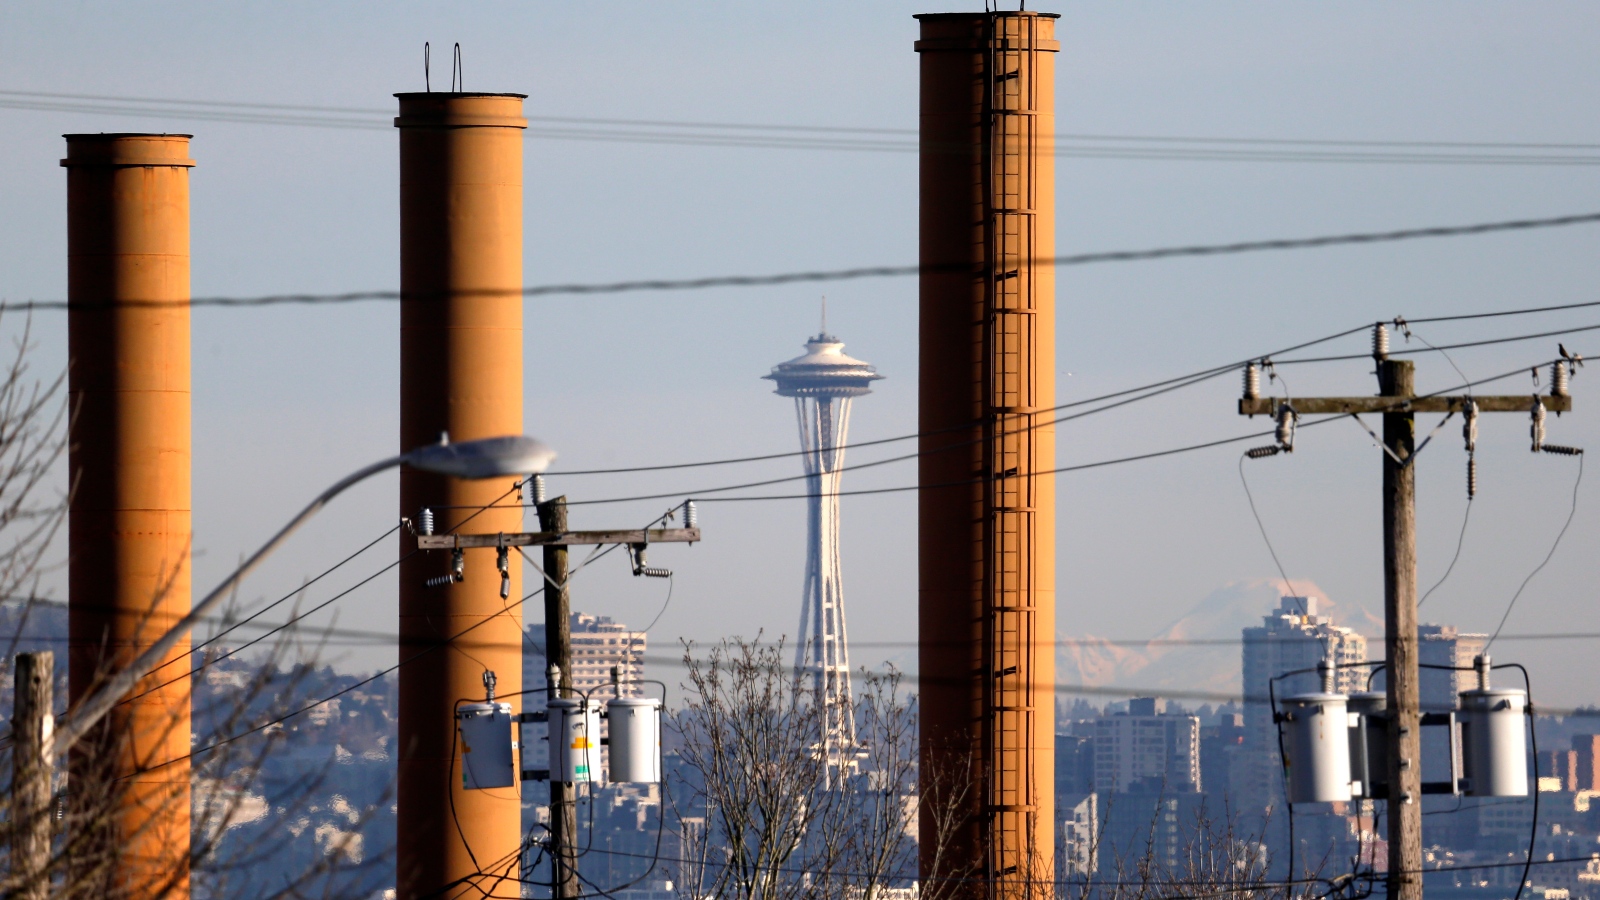 Photo of the Space Needle and downtown Seattle seen through industrial smokestacks.